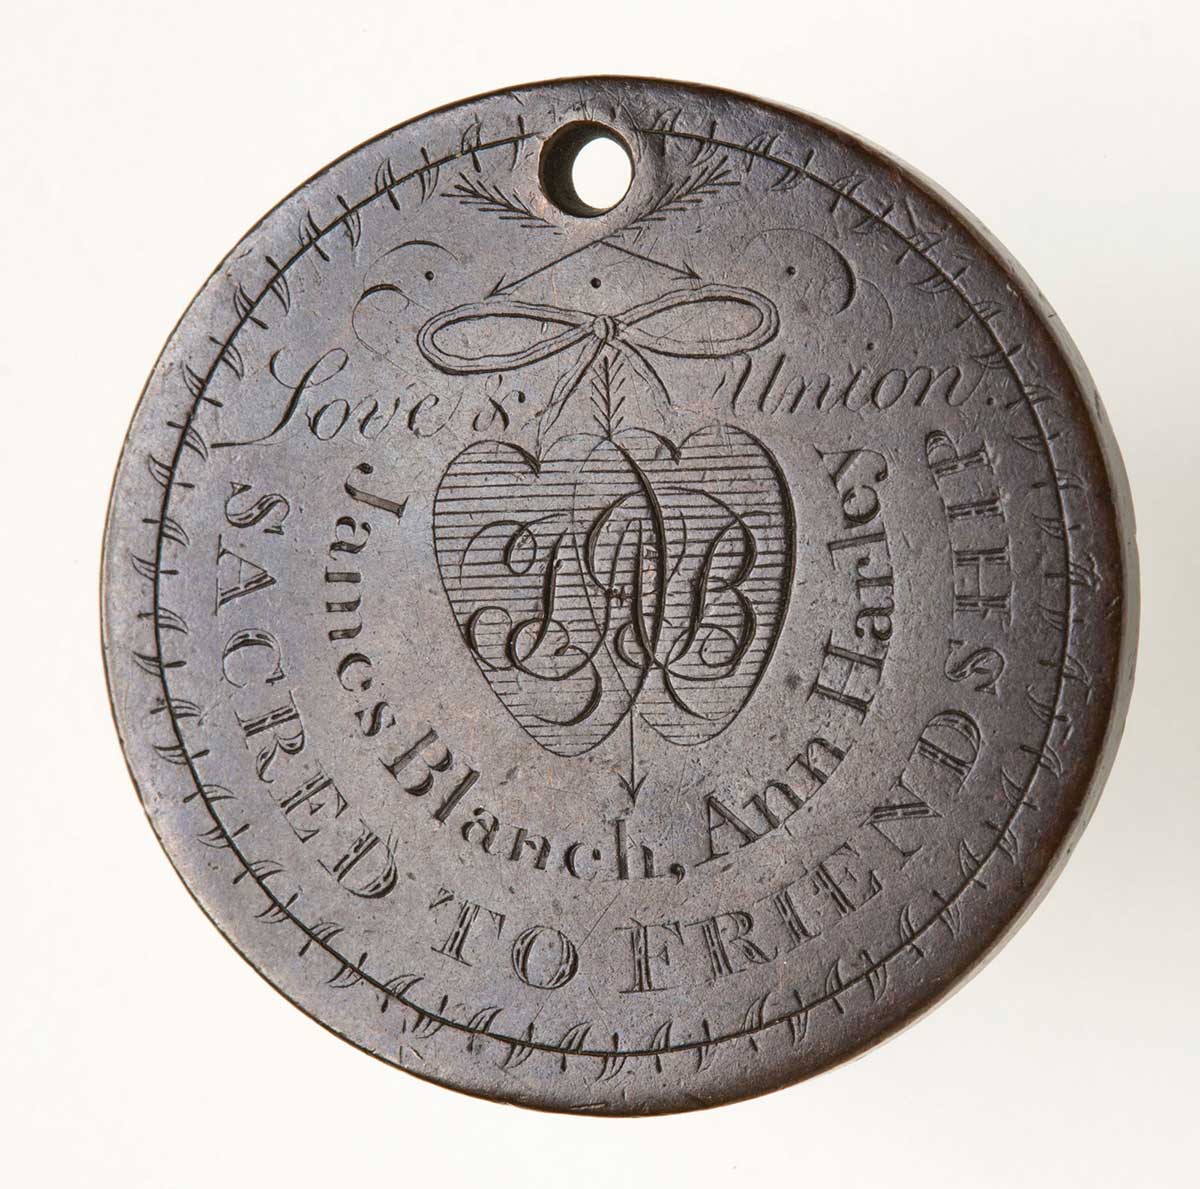 A convict love token made up of a coin engraved on one side. The engraved side features the text 'Love & Union / JAB / James Blanch / Ann Harley / SACRED TO FRIENDSHIP' around a design of two hearts joined by a ribbon.